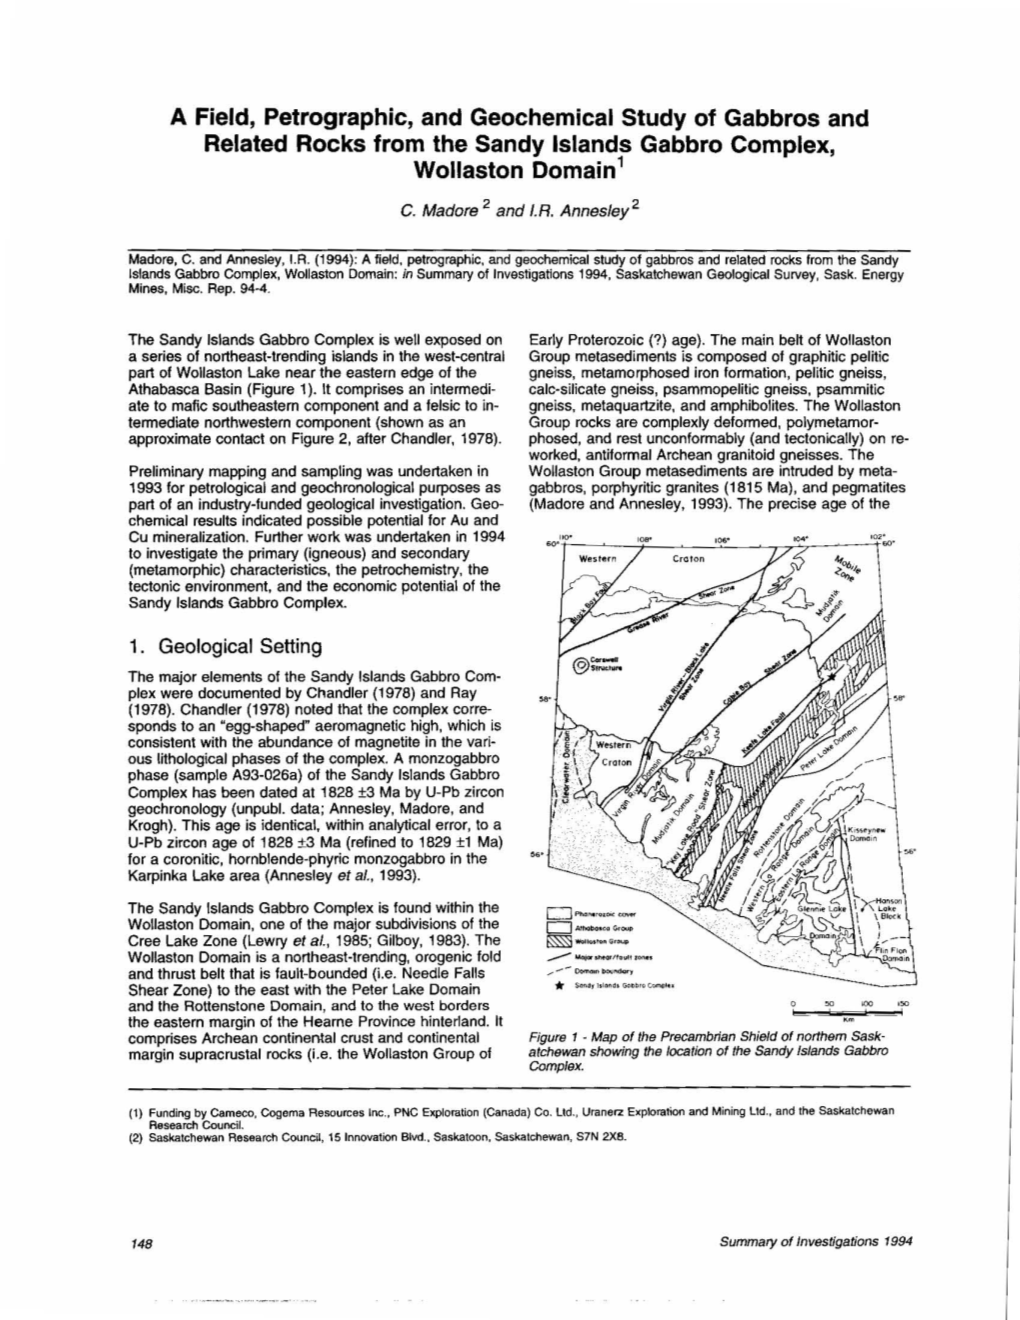 A Field, Petrographic, and Geochemical Study of Gabbros and Related Rocks from the Sandy Islands Gabbro Complex, Wollaston Domain 1